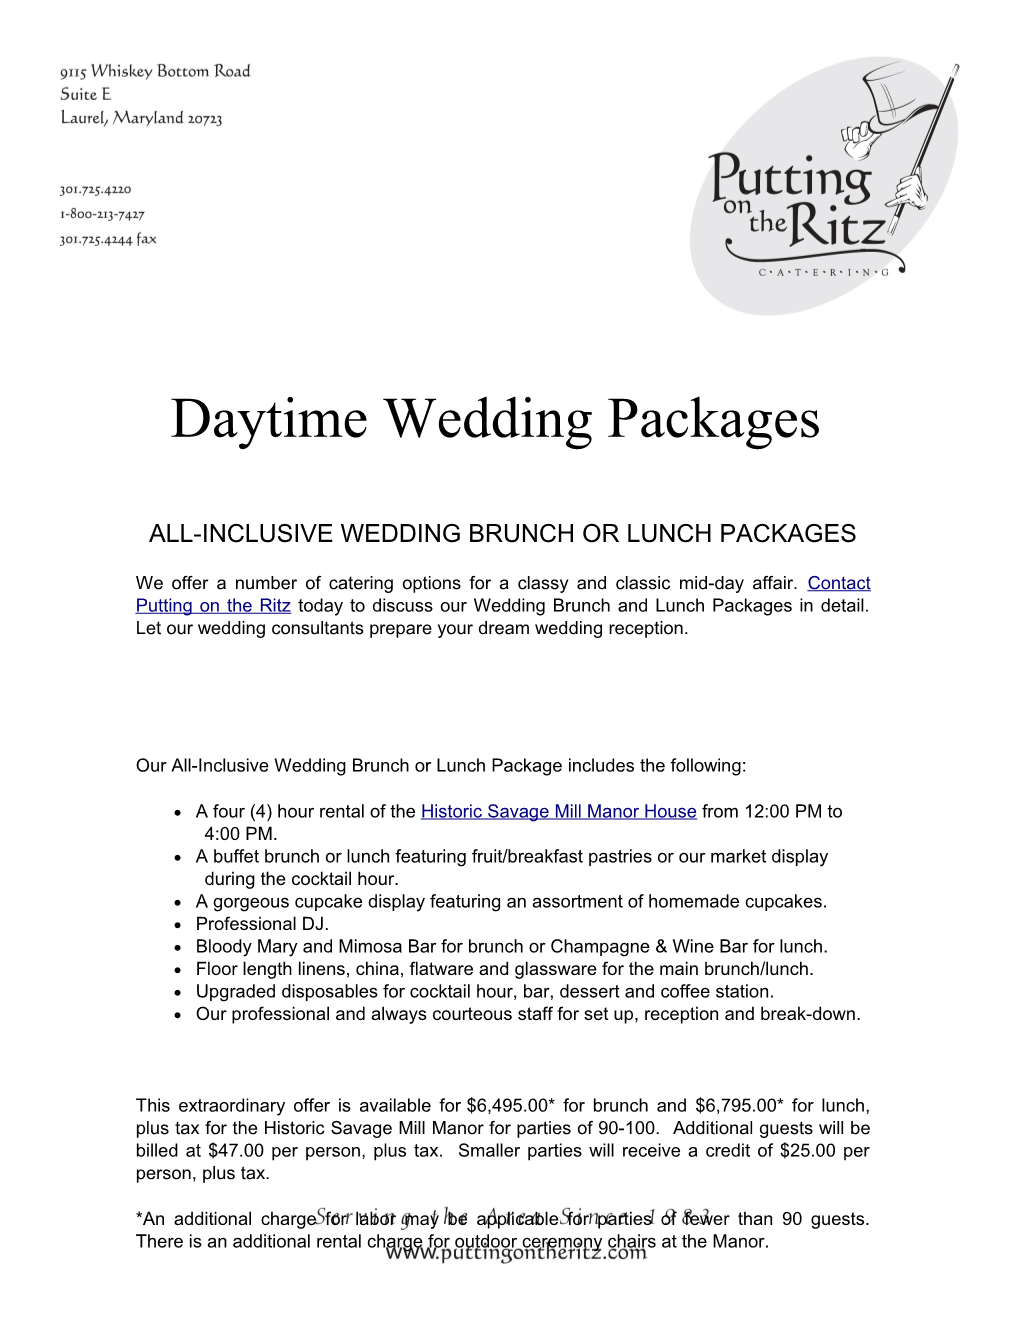 All-Inclusive Wedding Brunch Or Lunch Packages